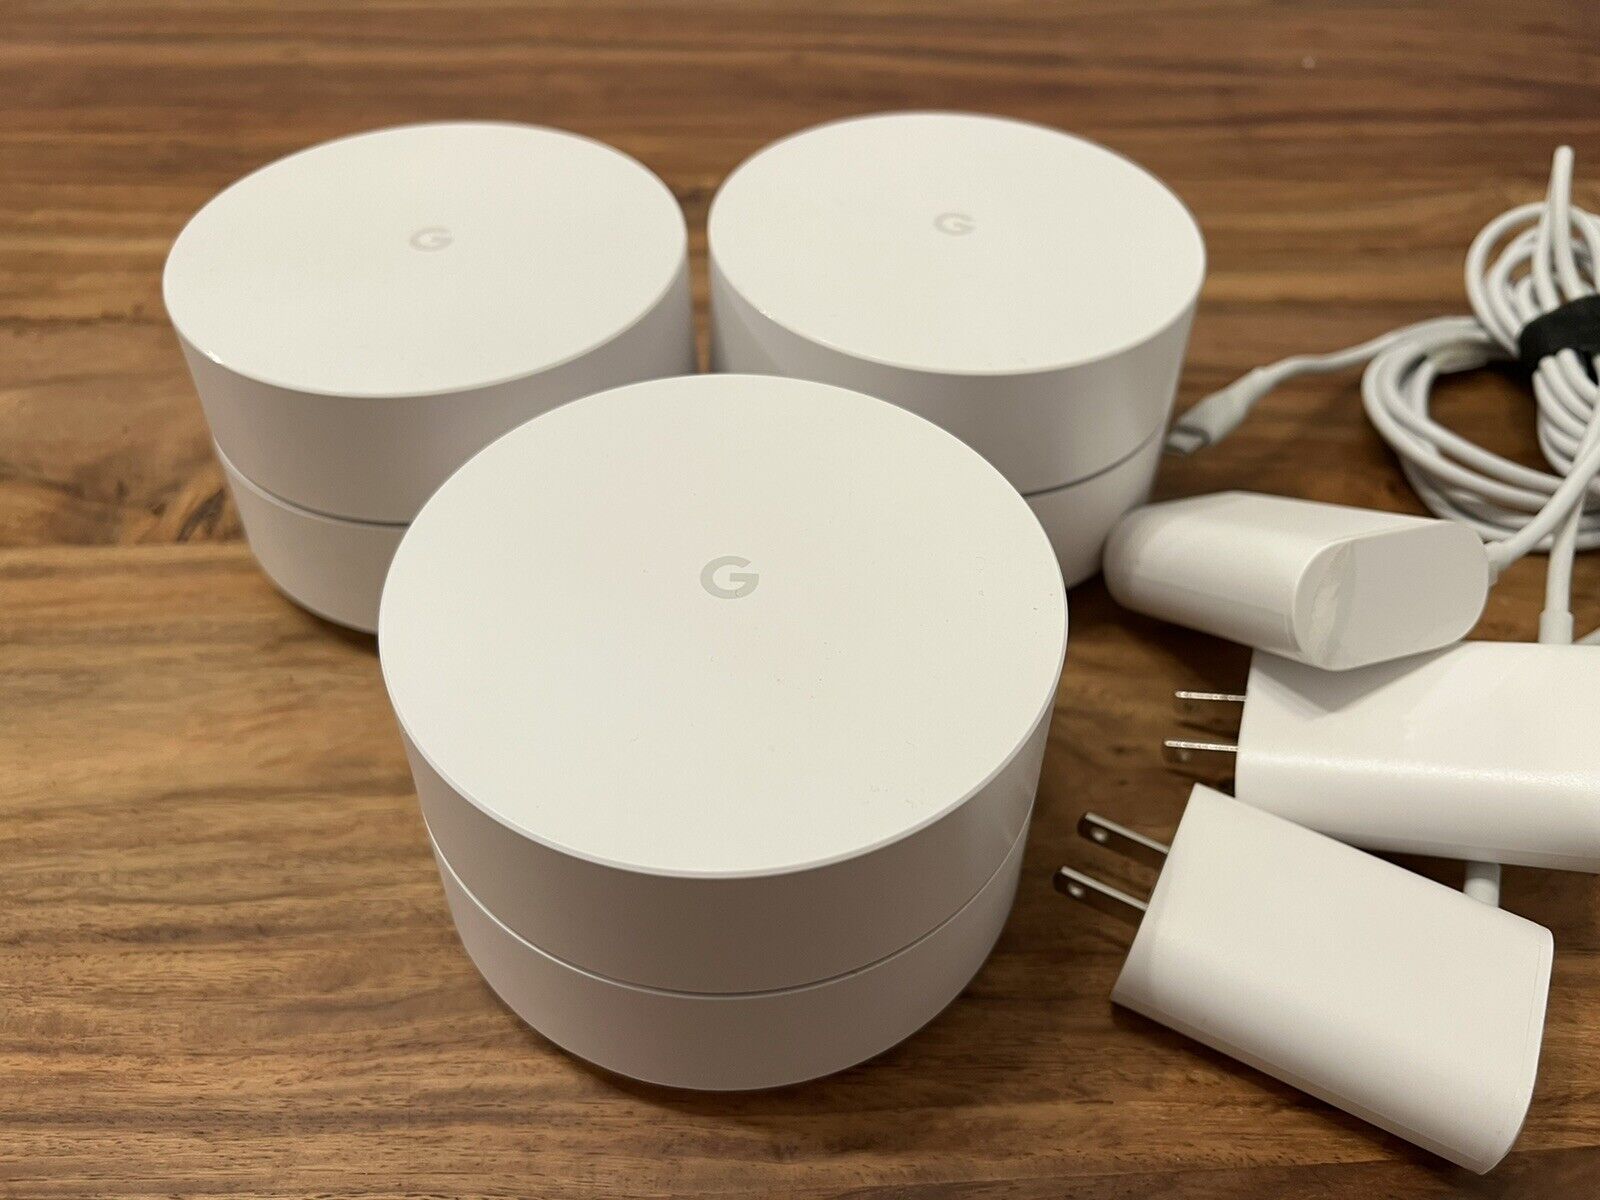 Google AC1200 1200 Mbps 2 Port 1200 Mbps Wireles Router - 3 Pack